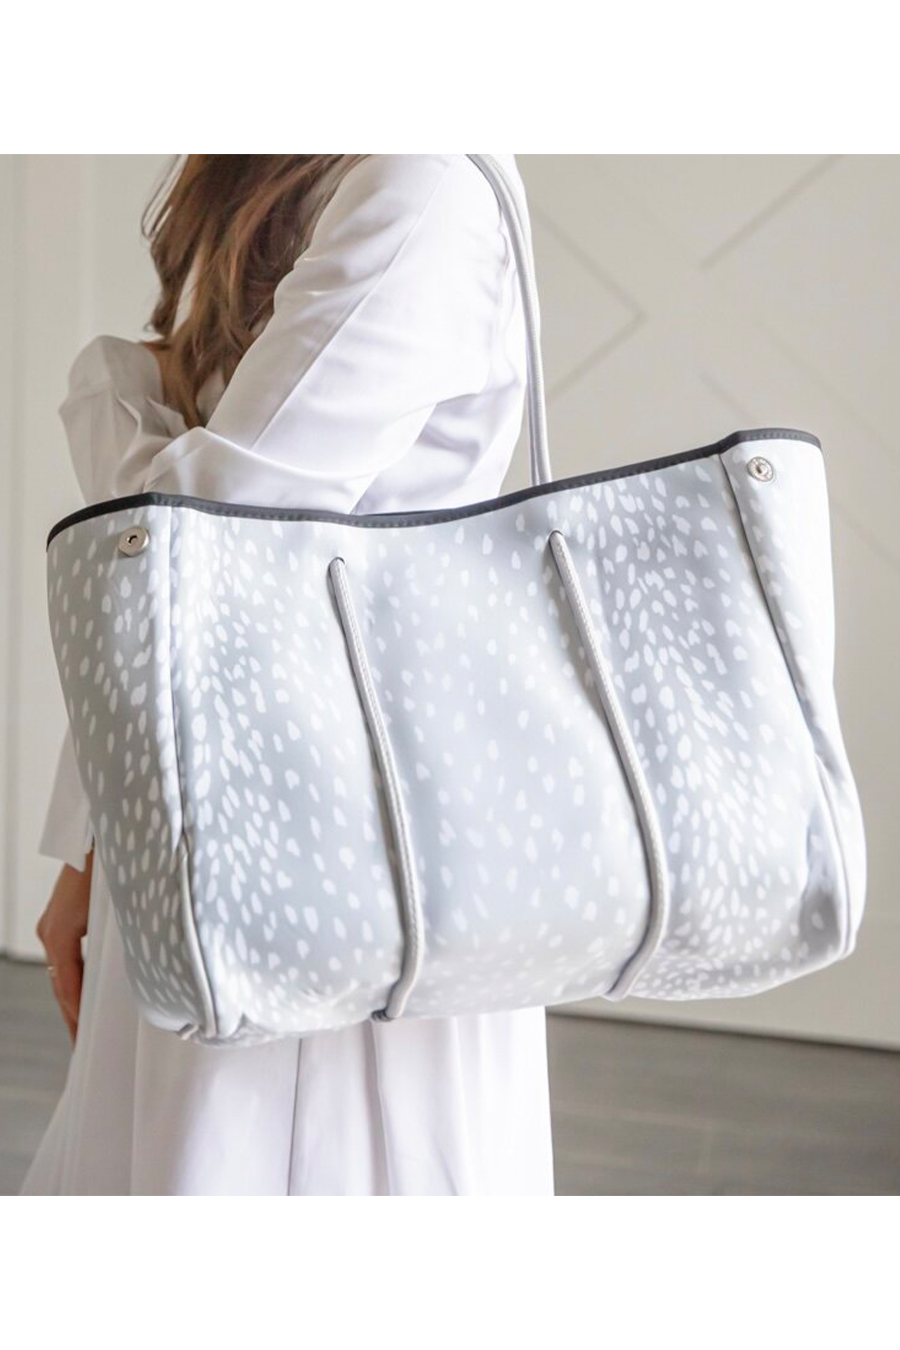 Neoprene Tote | Grey Fawn - Main Image Number 3 of 3